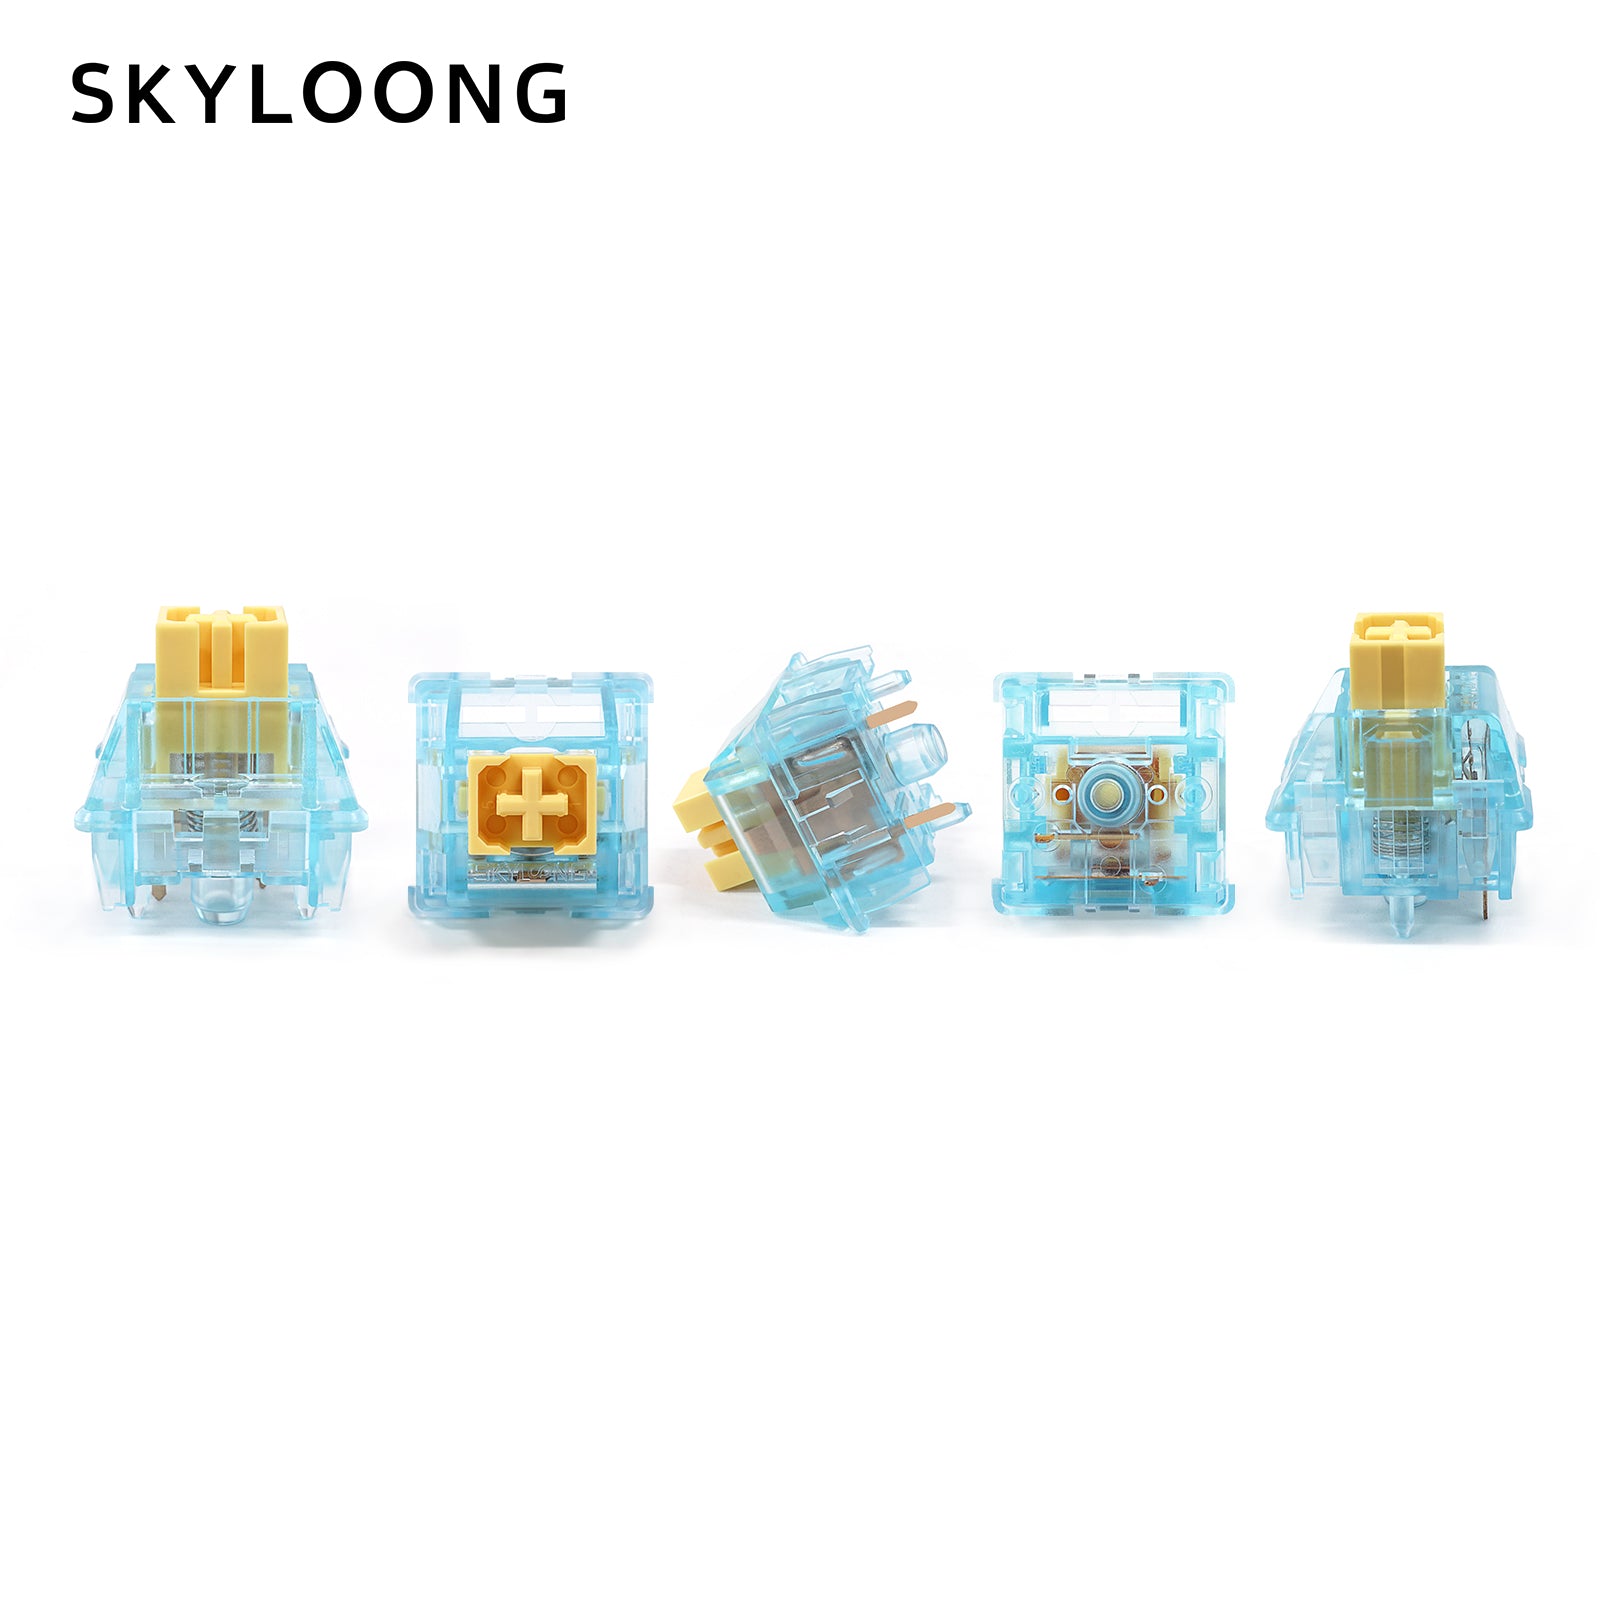 SKYLOONG Glacier Switch Silent Series